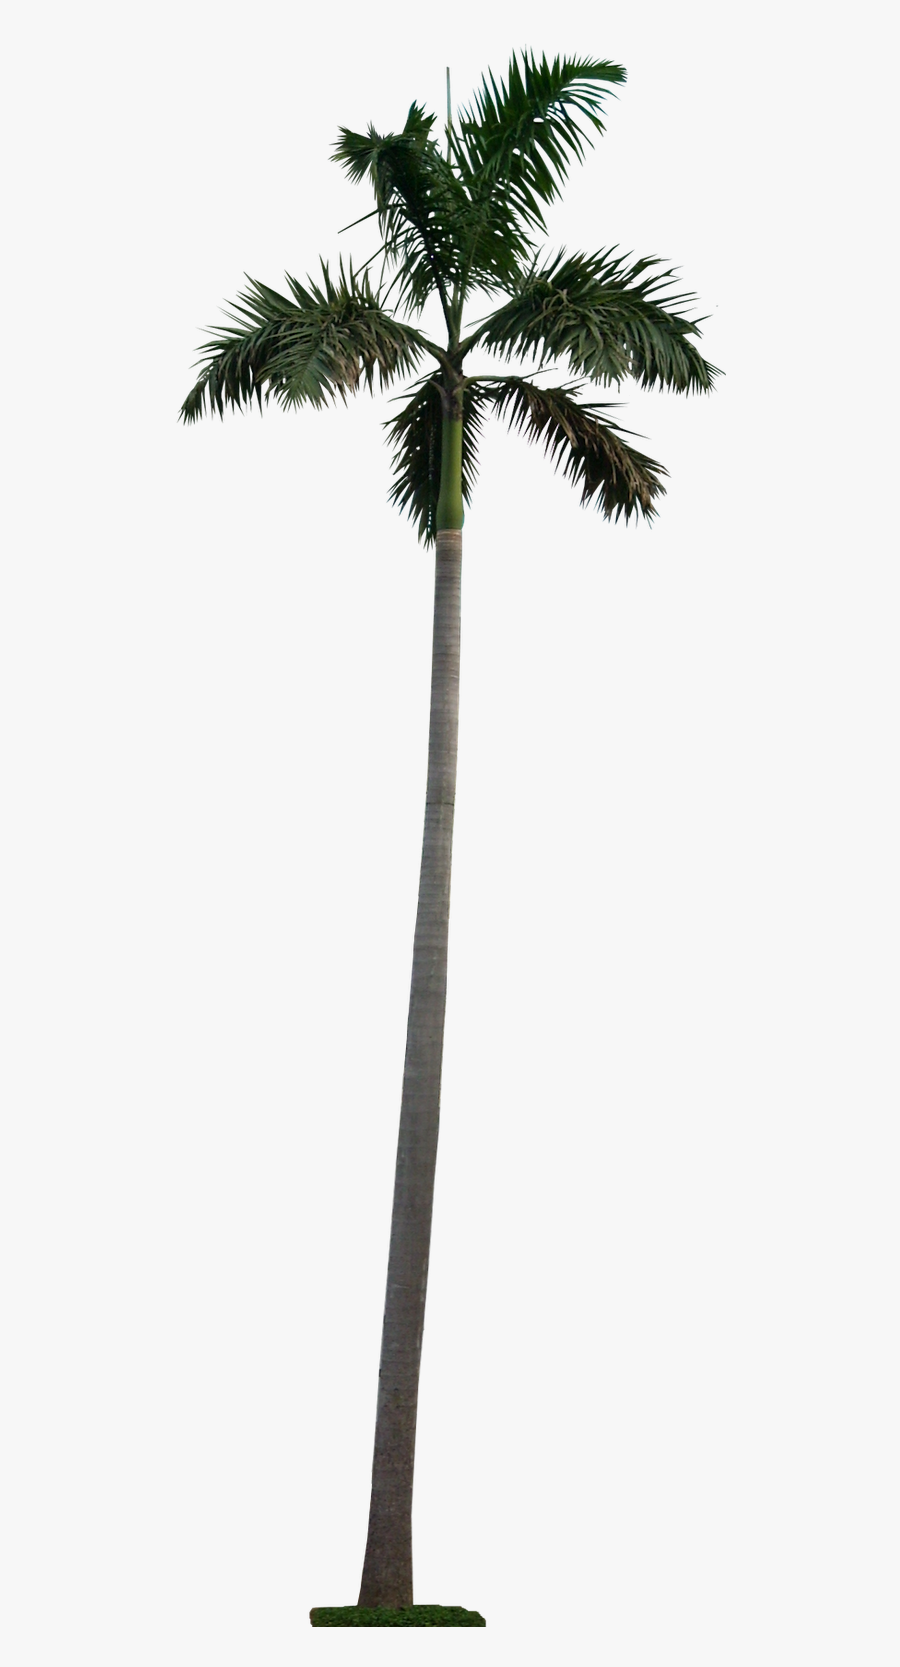 Jamaican Royal Palm Or Mountain Cabbage Palm Jamaican - Long Palm Tree Png, Transparent Clipart